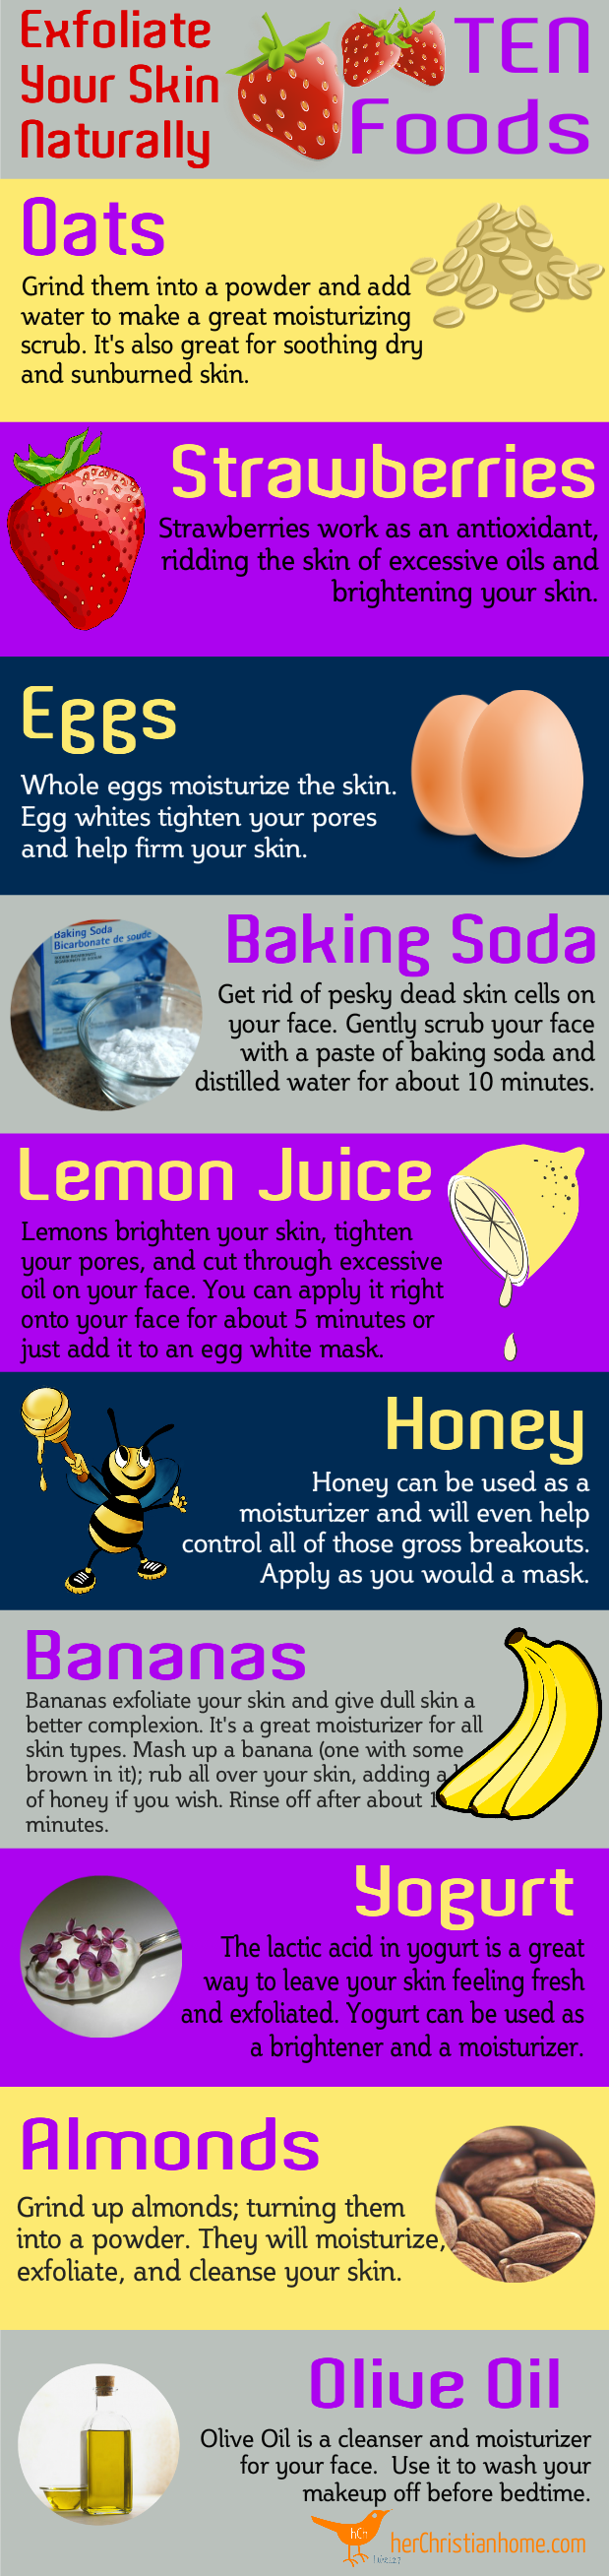 How to Exfoliate Your Skin Naturally at Home